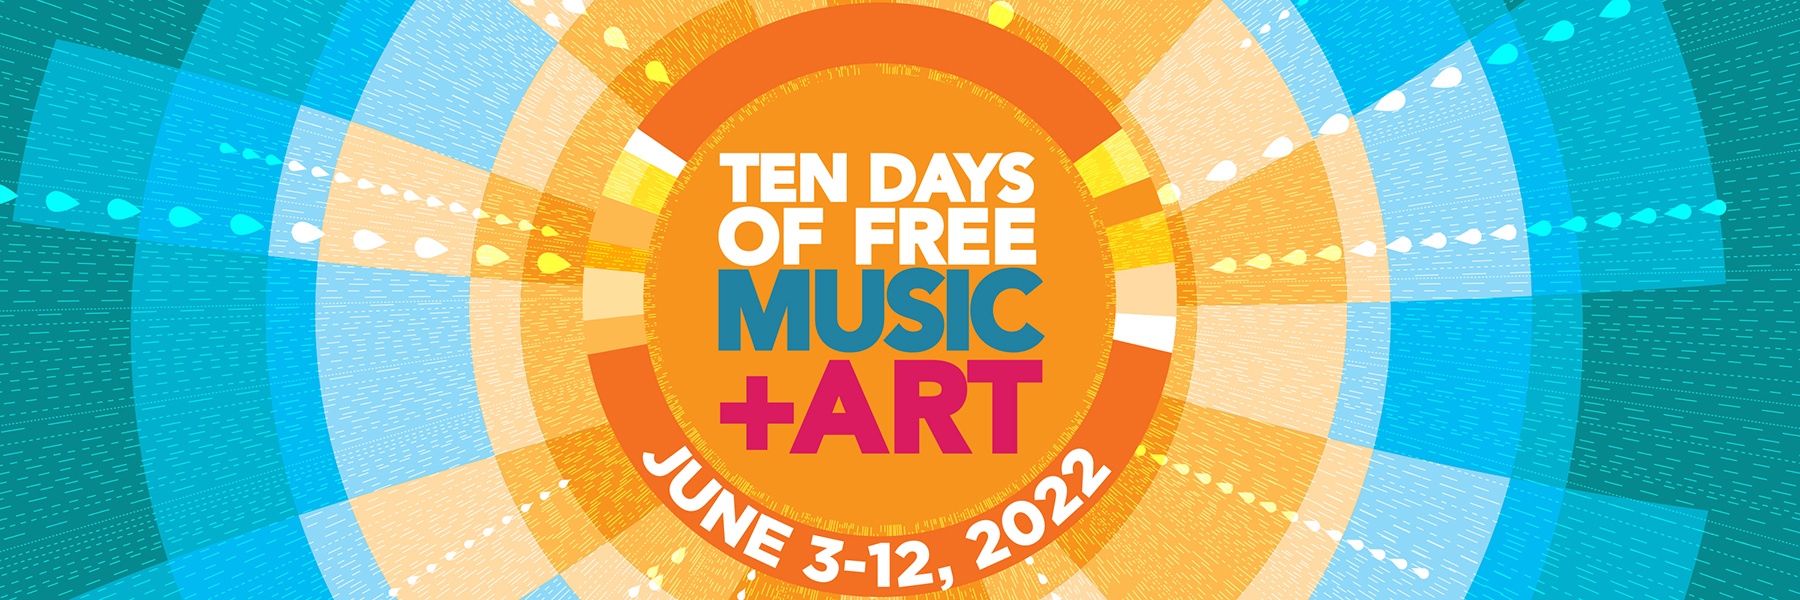 Text over an orange and blue circular patchwork pattern. Ten Days of Free Music + Art | June 3-12, 2022